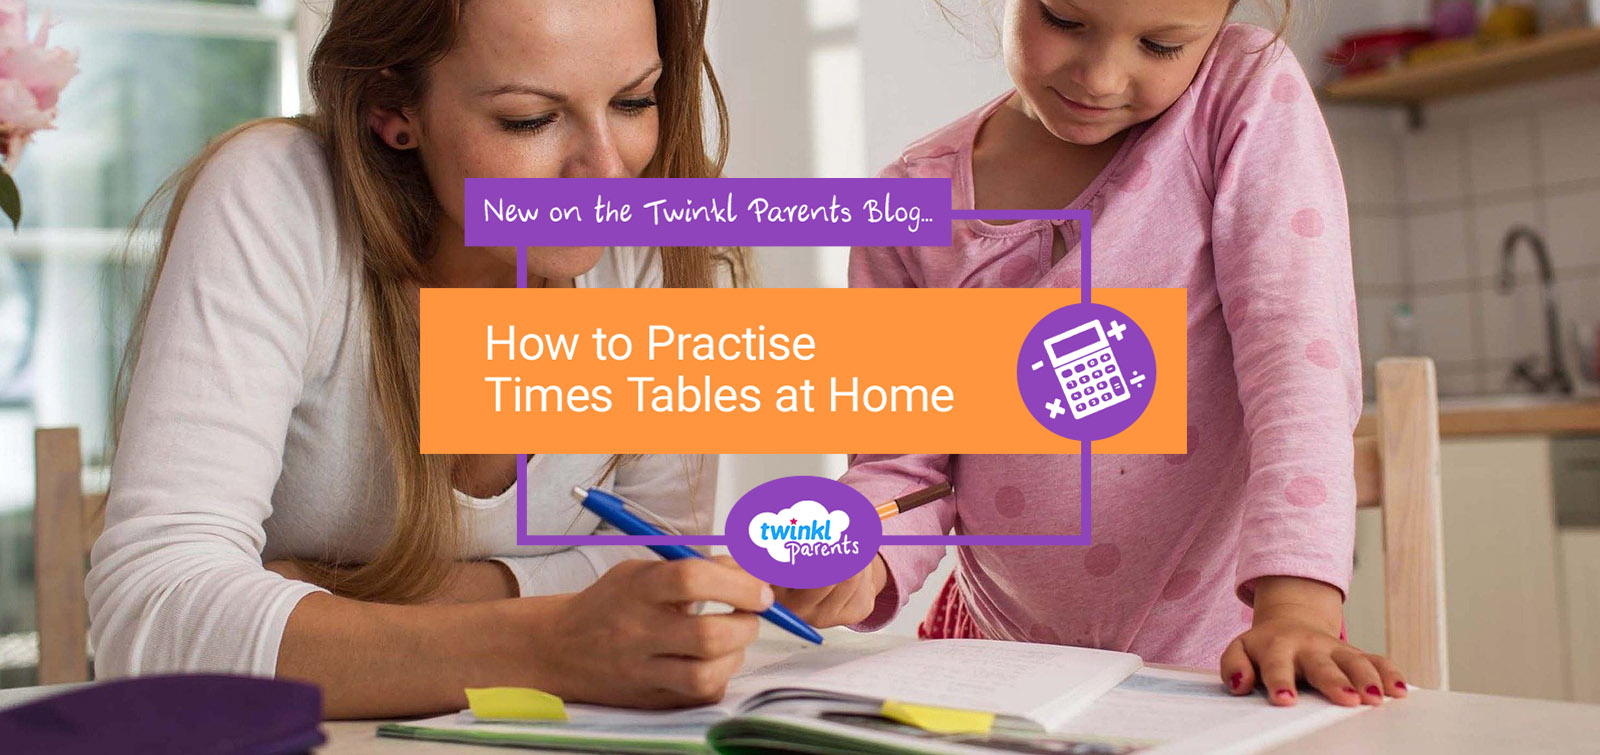 how-to-practise-times-tables-at-home-twinkl